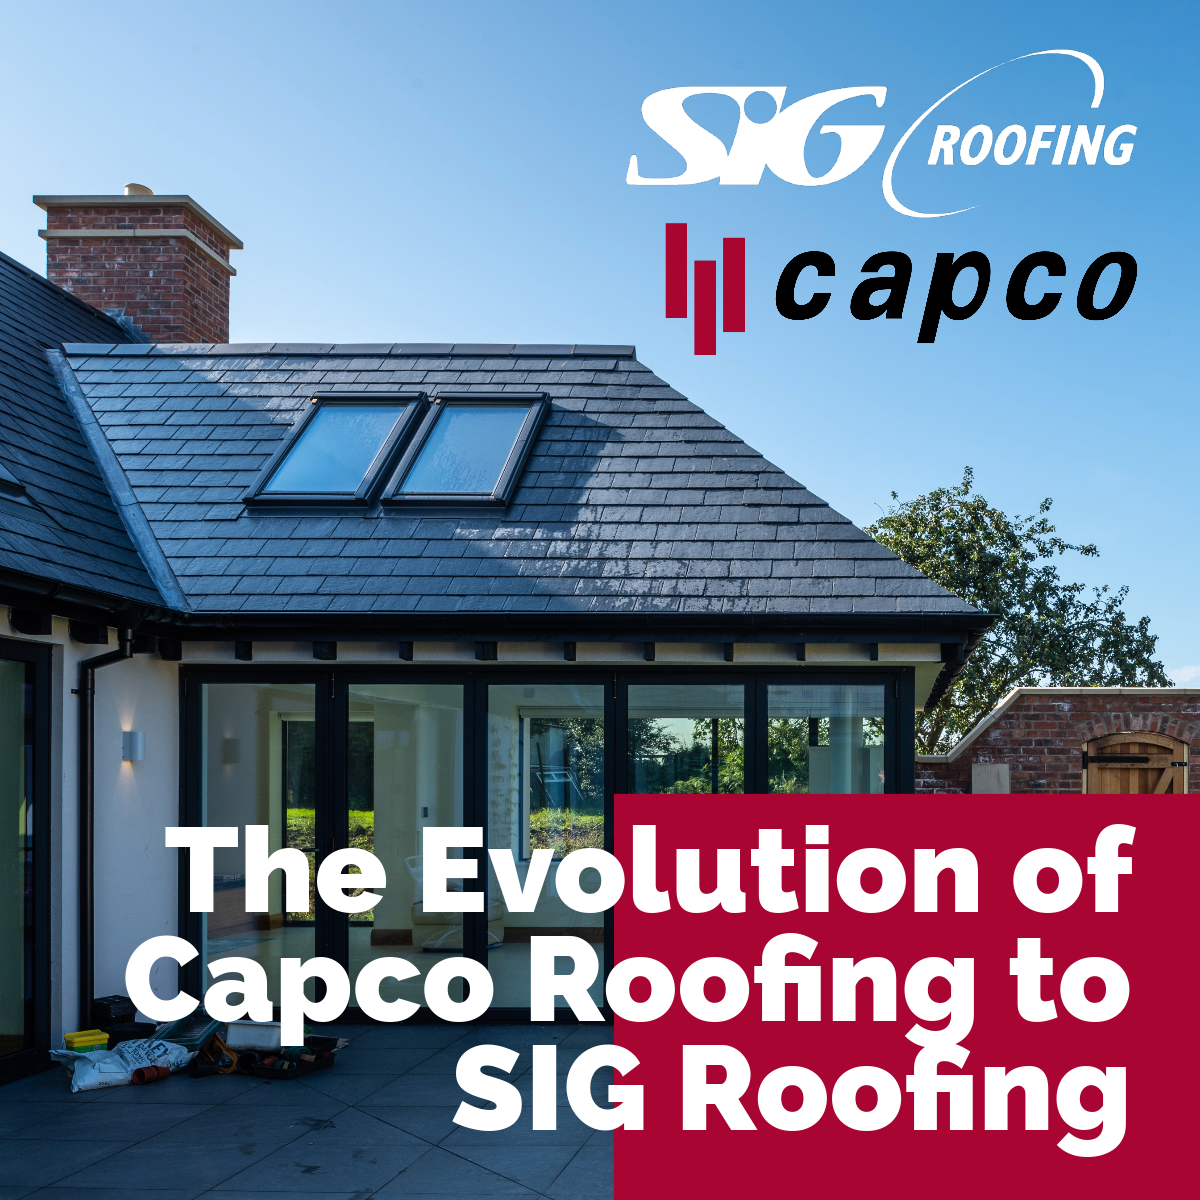 capco roofing